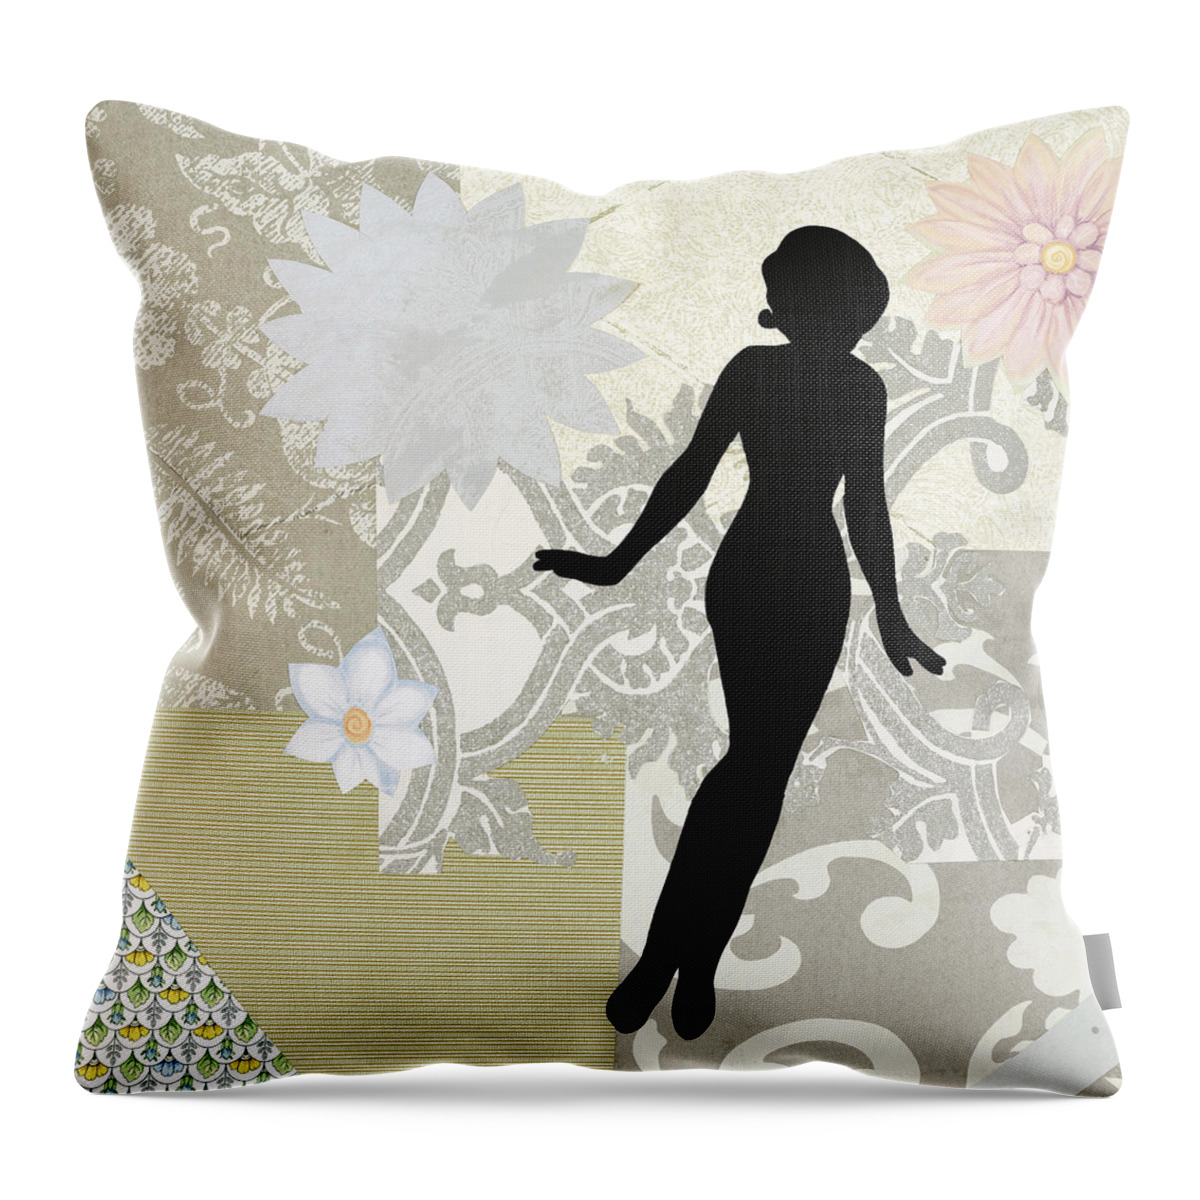 Girls Room Art Throw Pillow featuring the mixed media Silver Paper Doll by Katia Von Kral